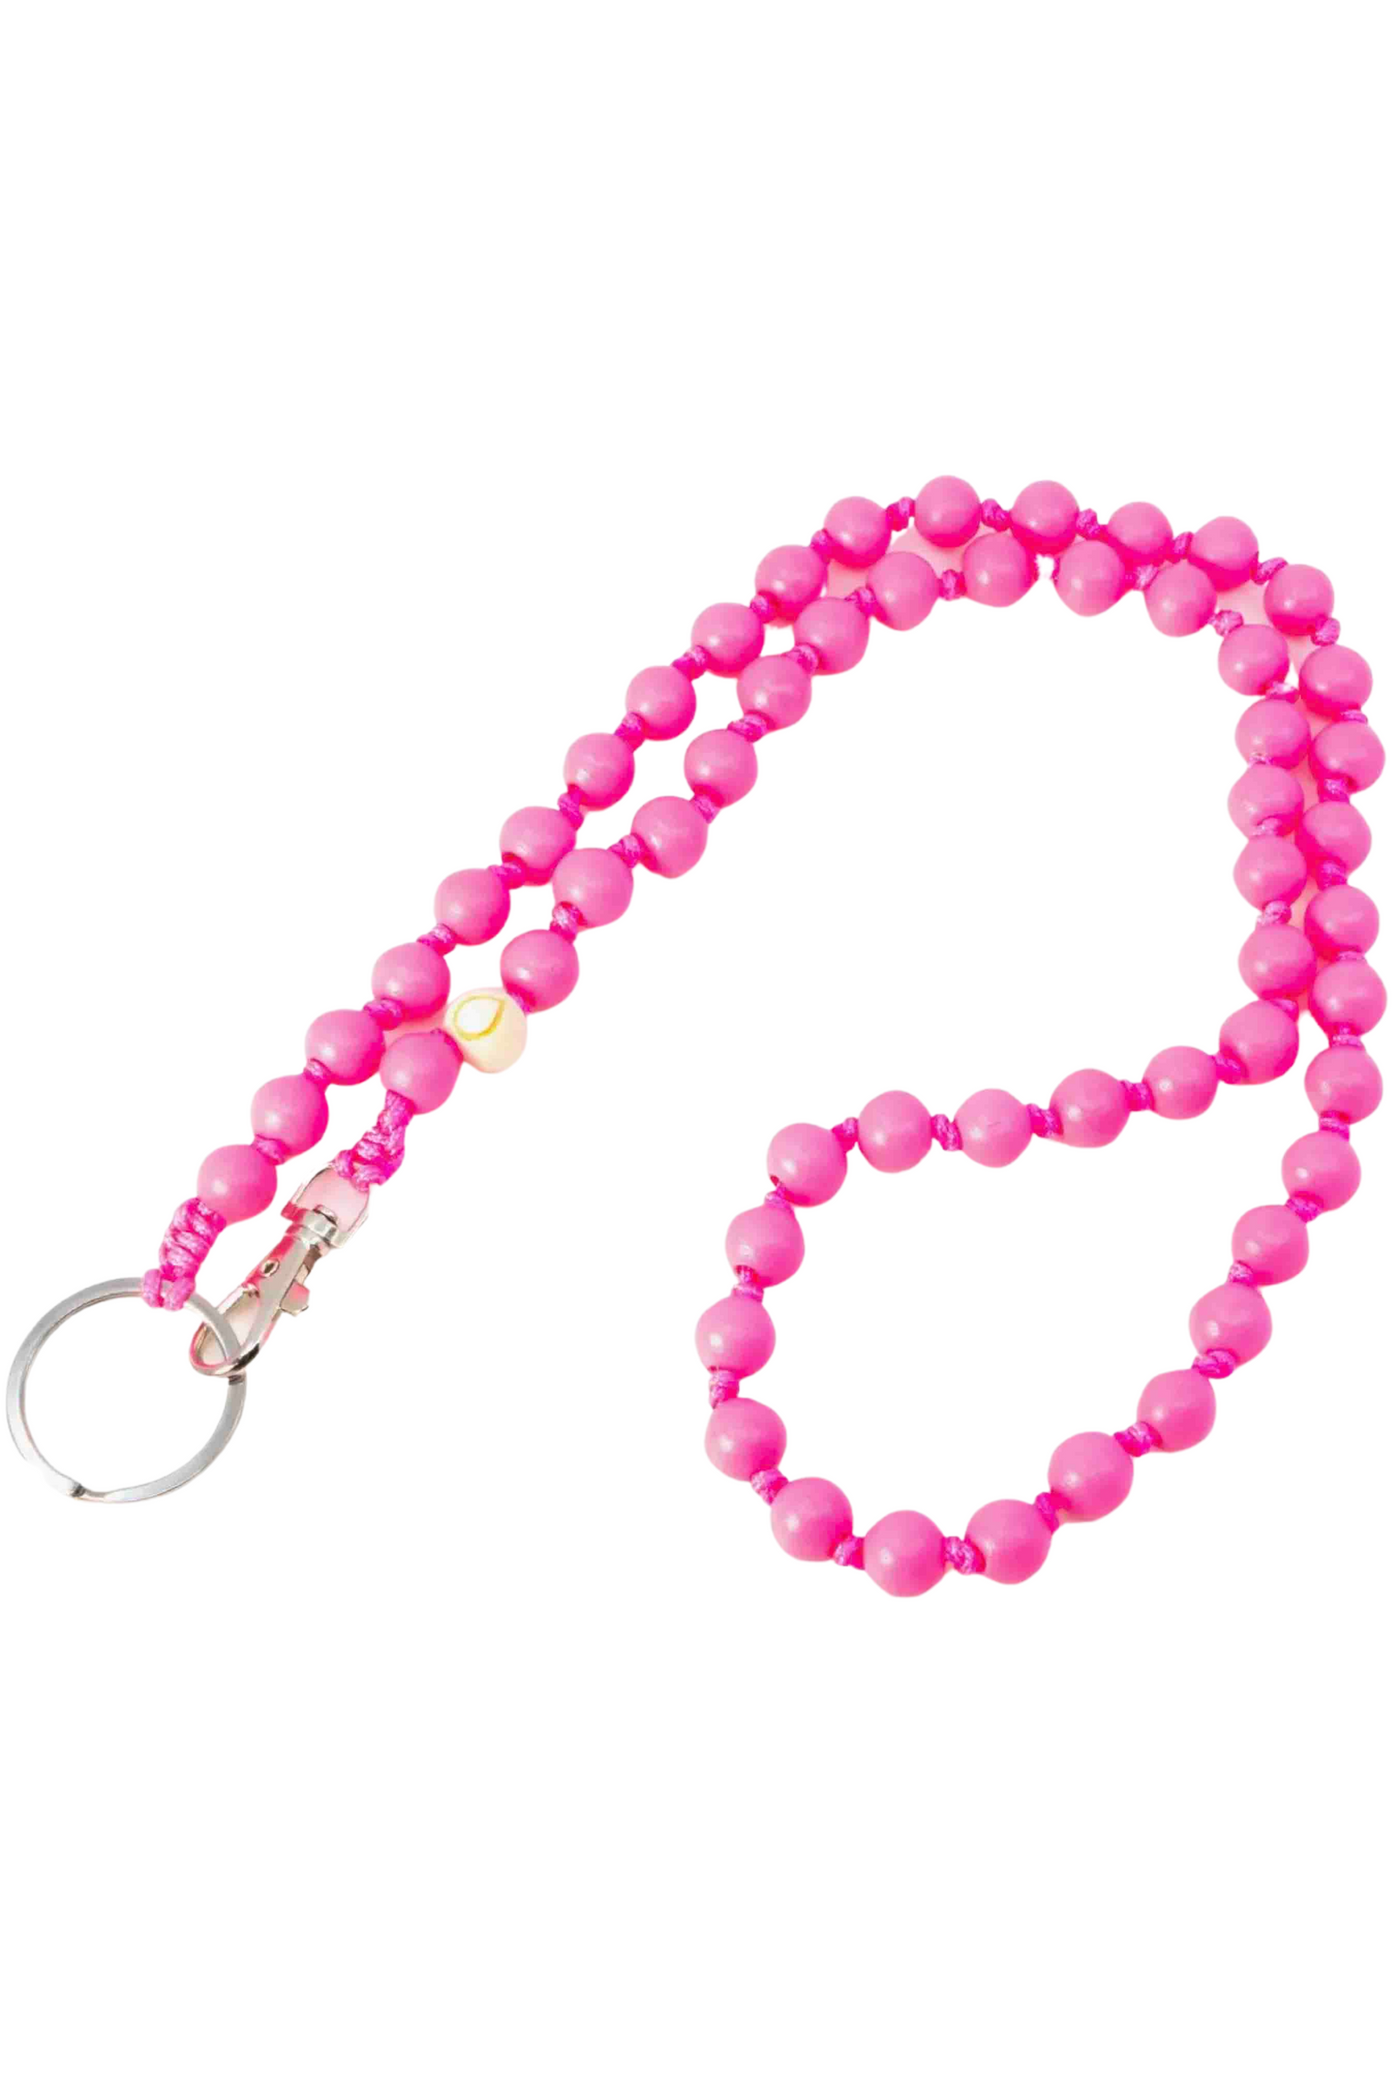 The Pink Beaded Key Chain-Dropletsy